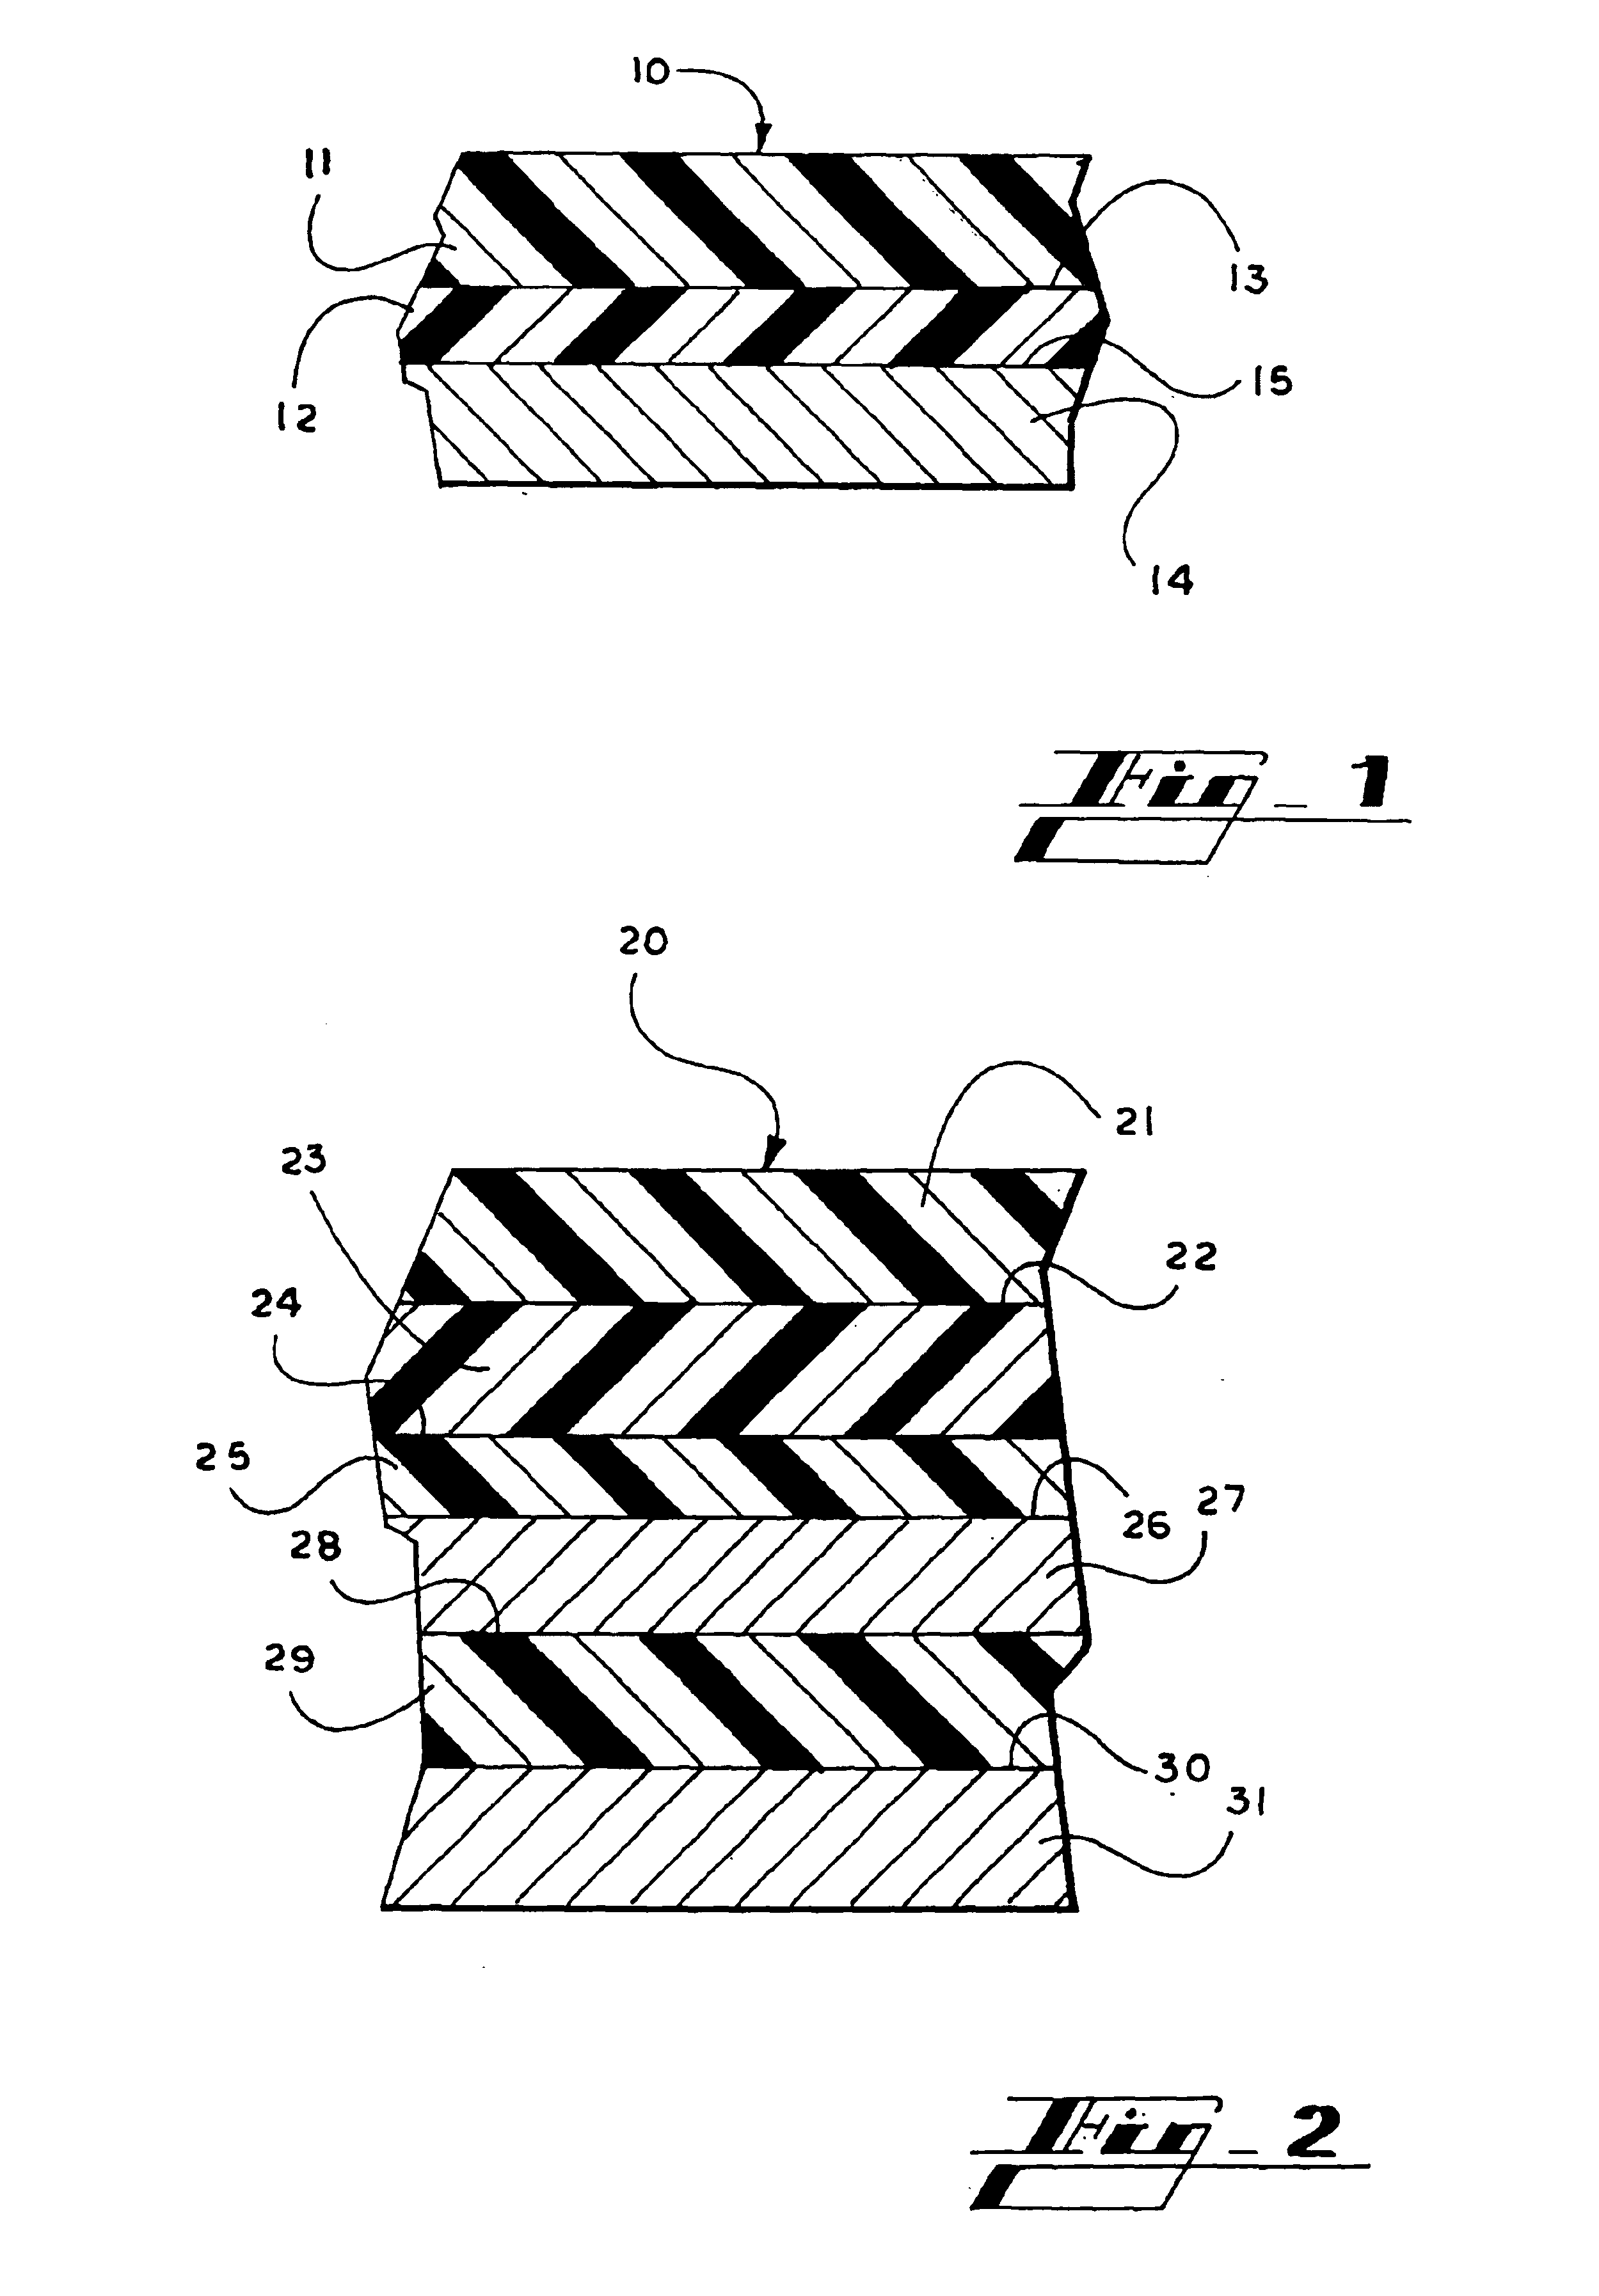 Heat transfer material having meltable layers separated by a release coating layer